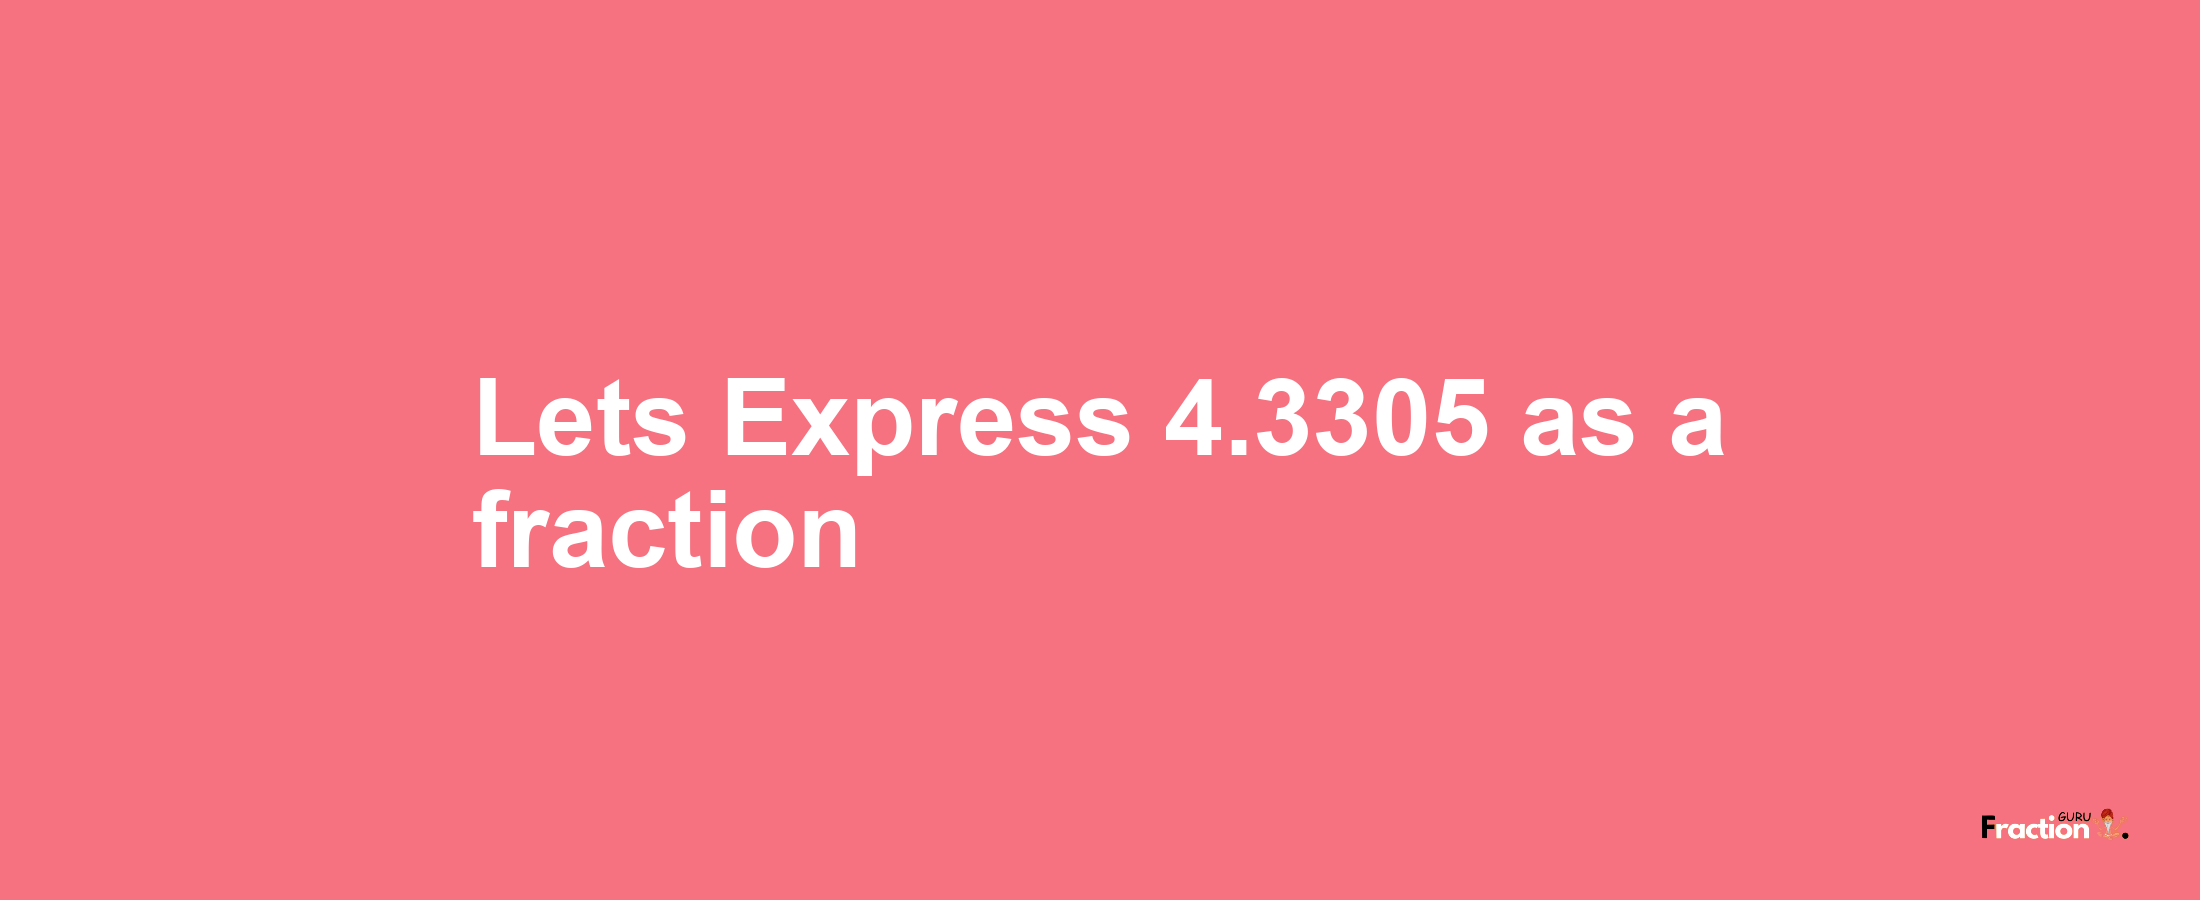 Lets Express 4.3305 as afraction